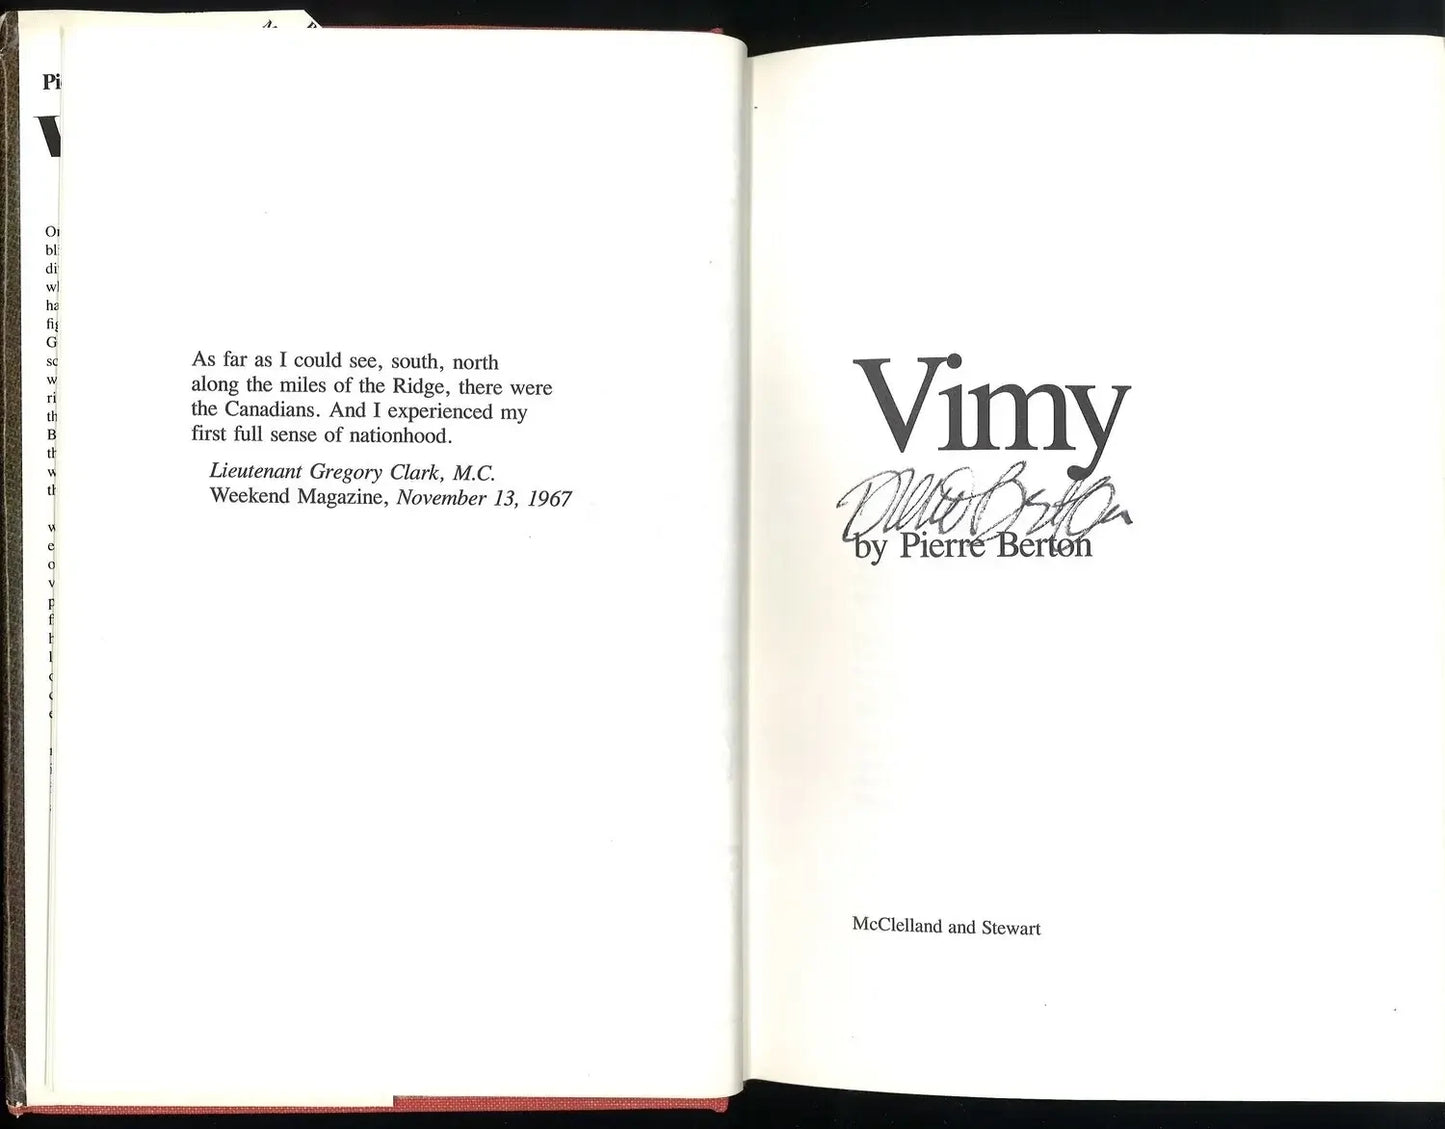 Vimy (Signed) by Pierre Berton